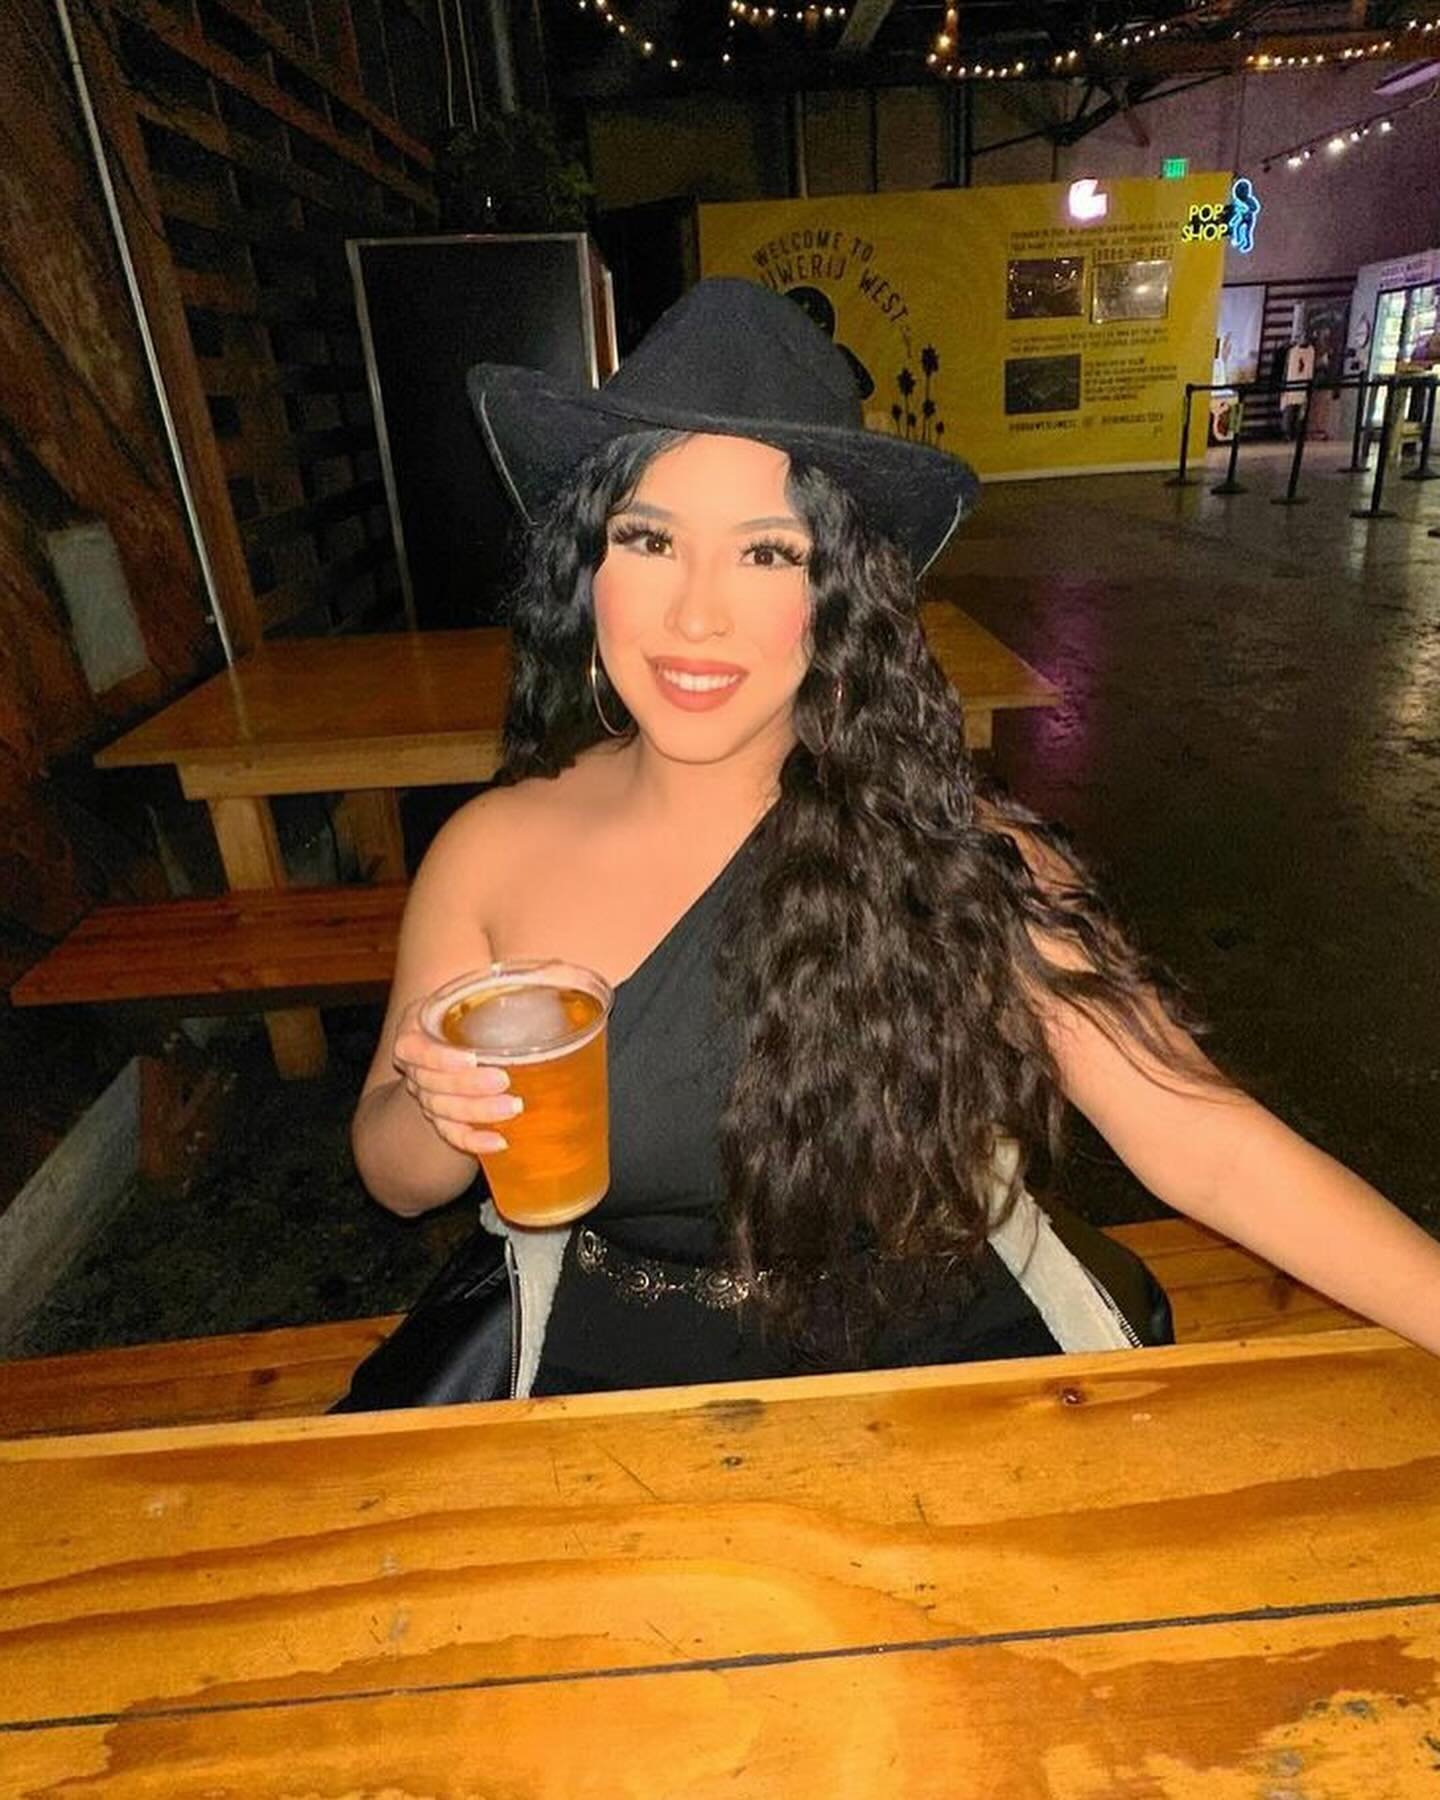 Who&rsquo;s ready for LA BOTA?! 💃 Click the link in bio to get your tickets 🎟️ We can&rsquo;t wait to see you all THIS Friday (5/10) 👢 Doors at 7pm

📸 Don&rsquo;t forget to tag us at @brouwerijwest to be featured!

@bri_garcia99 @thebiggestbeard1